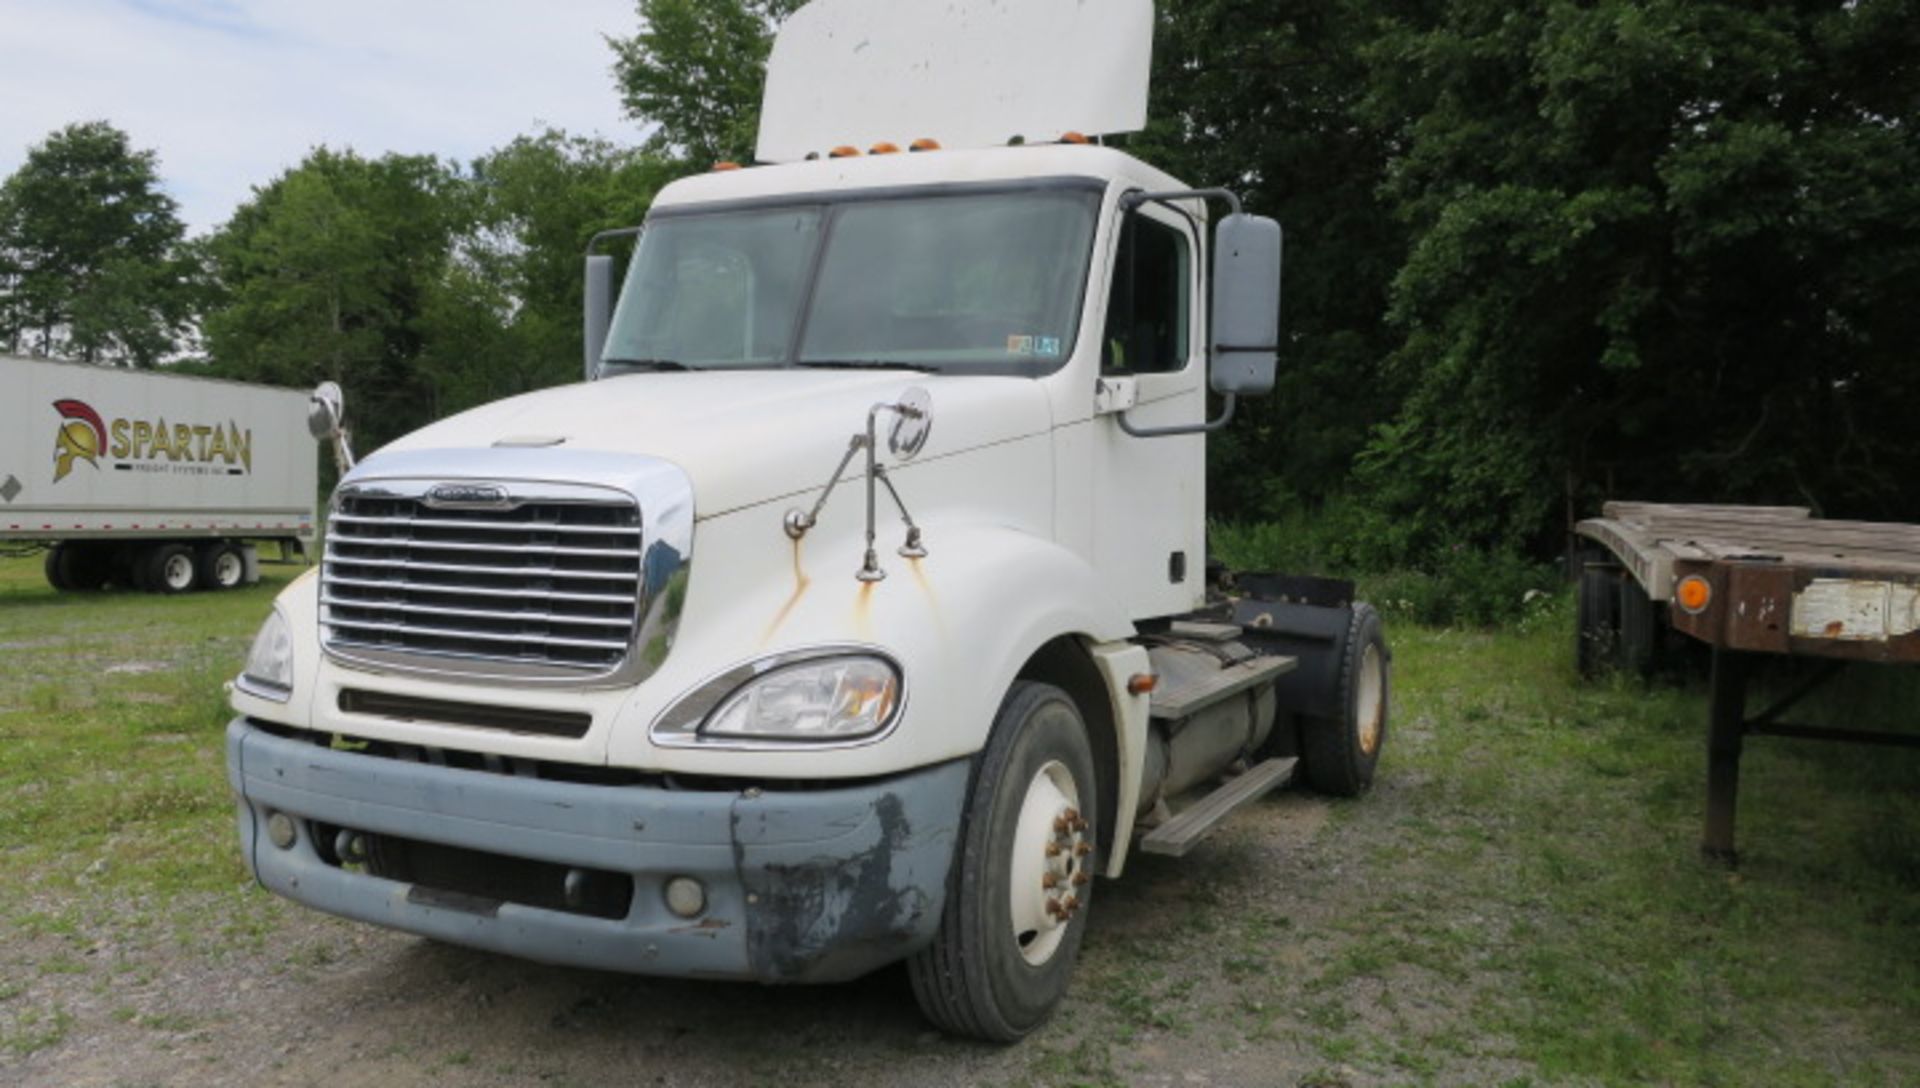 DAY CAB TRACTOR, 2005 FREIGHTLINER, Mdl. 6067HV6E, Fuller trans., Muncie PTO, Odo: approx. 600,000 - Image 6 of 6